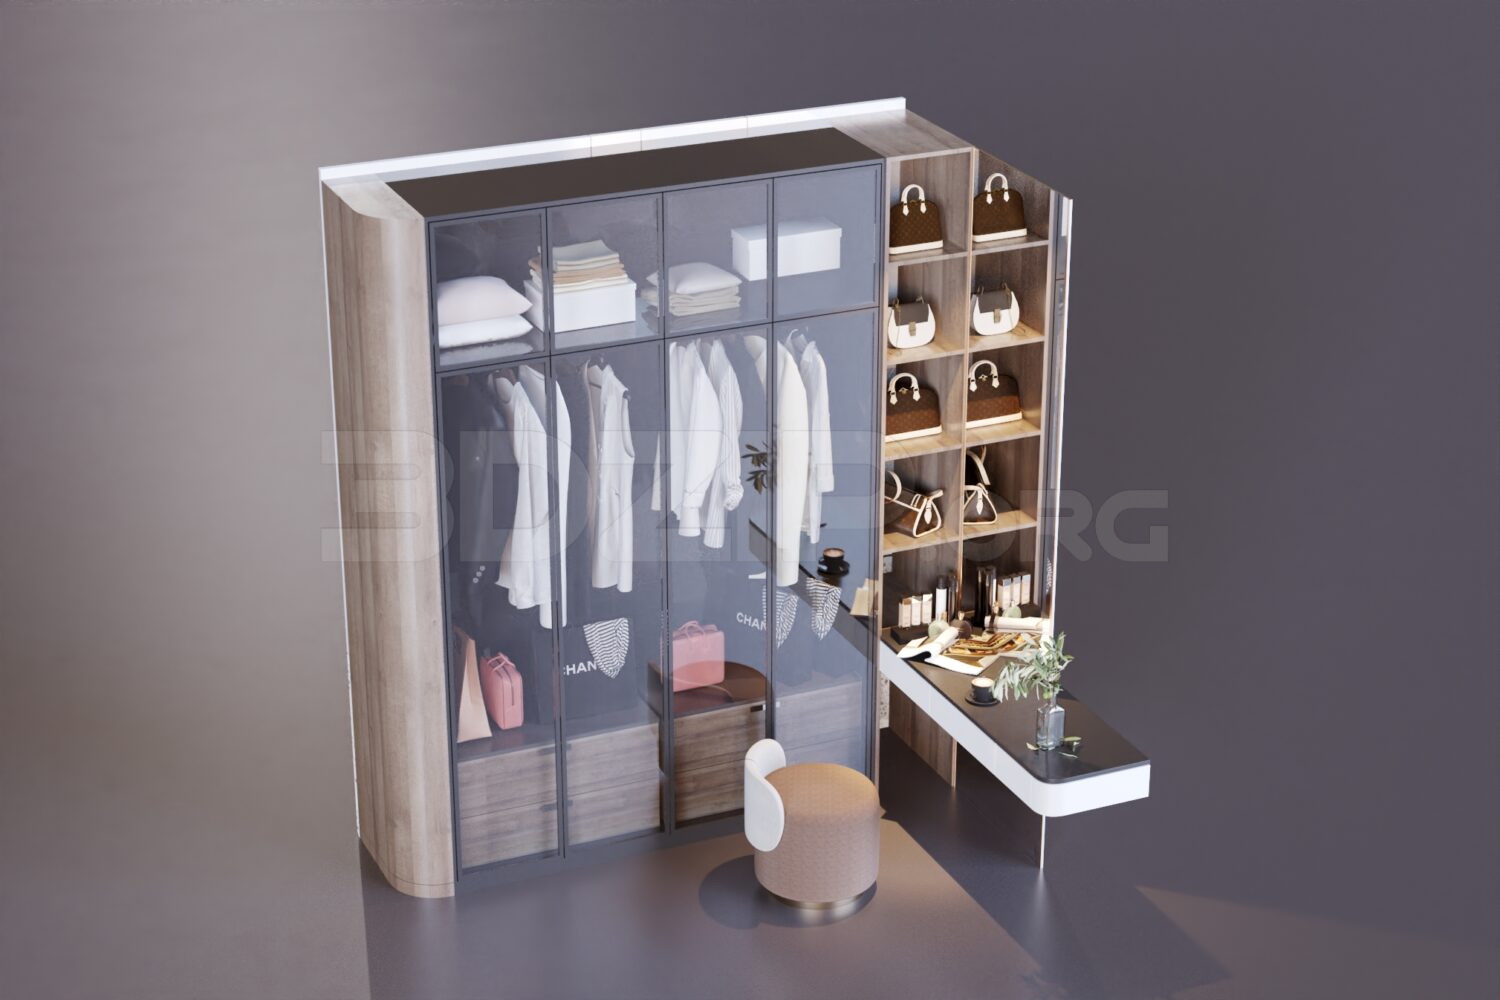 316. Download Free Wardrobe and Dressing Table Model By Khoa NQ